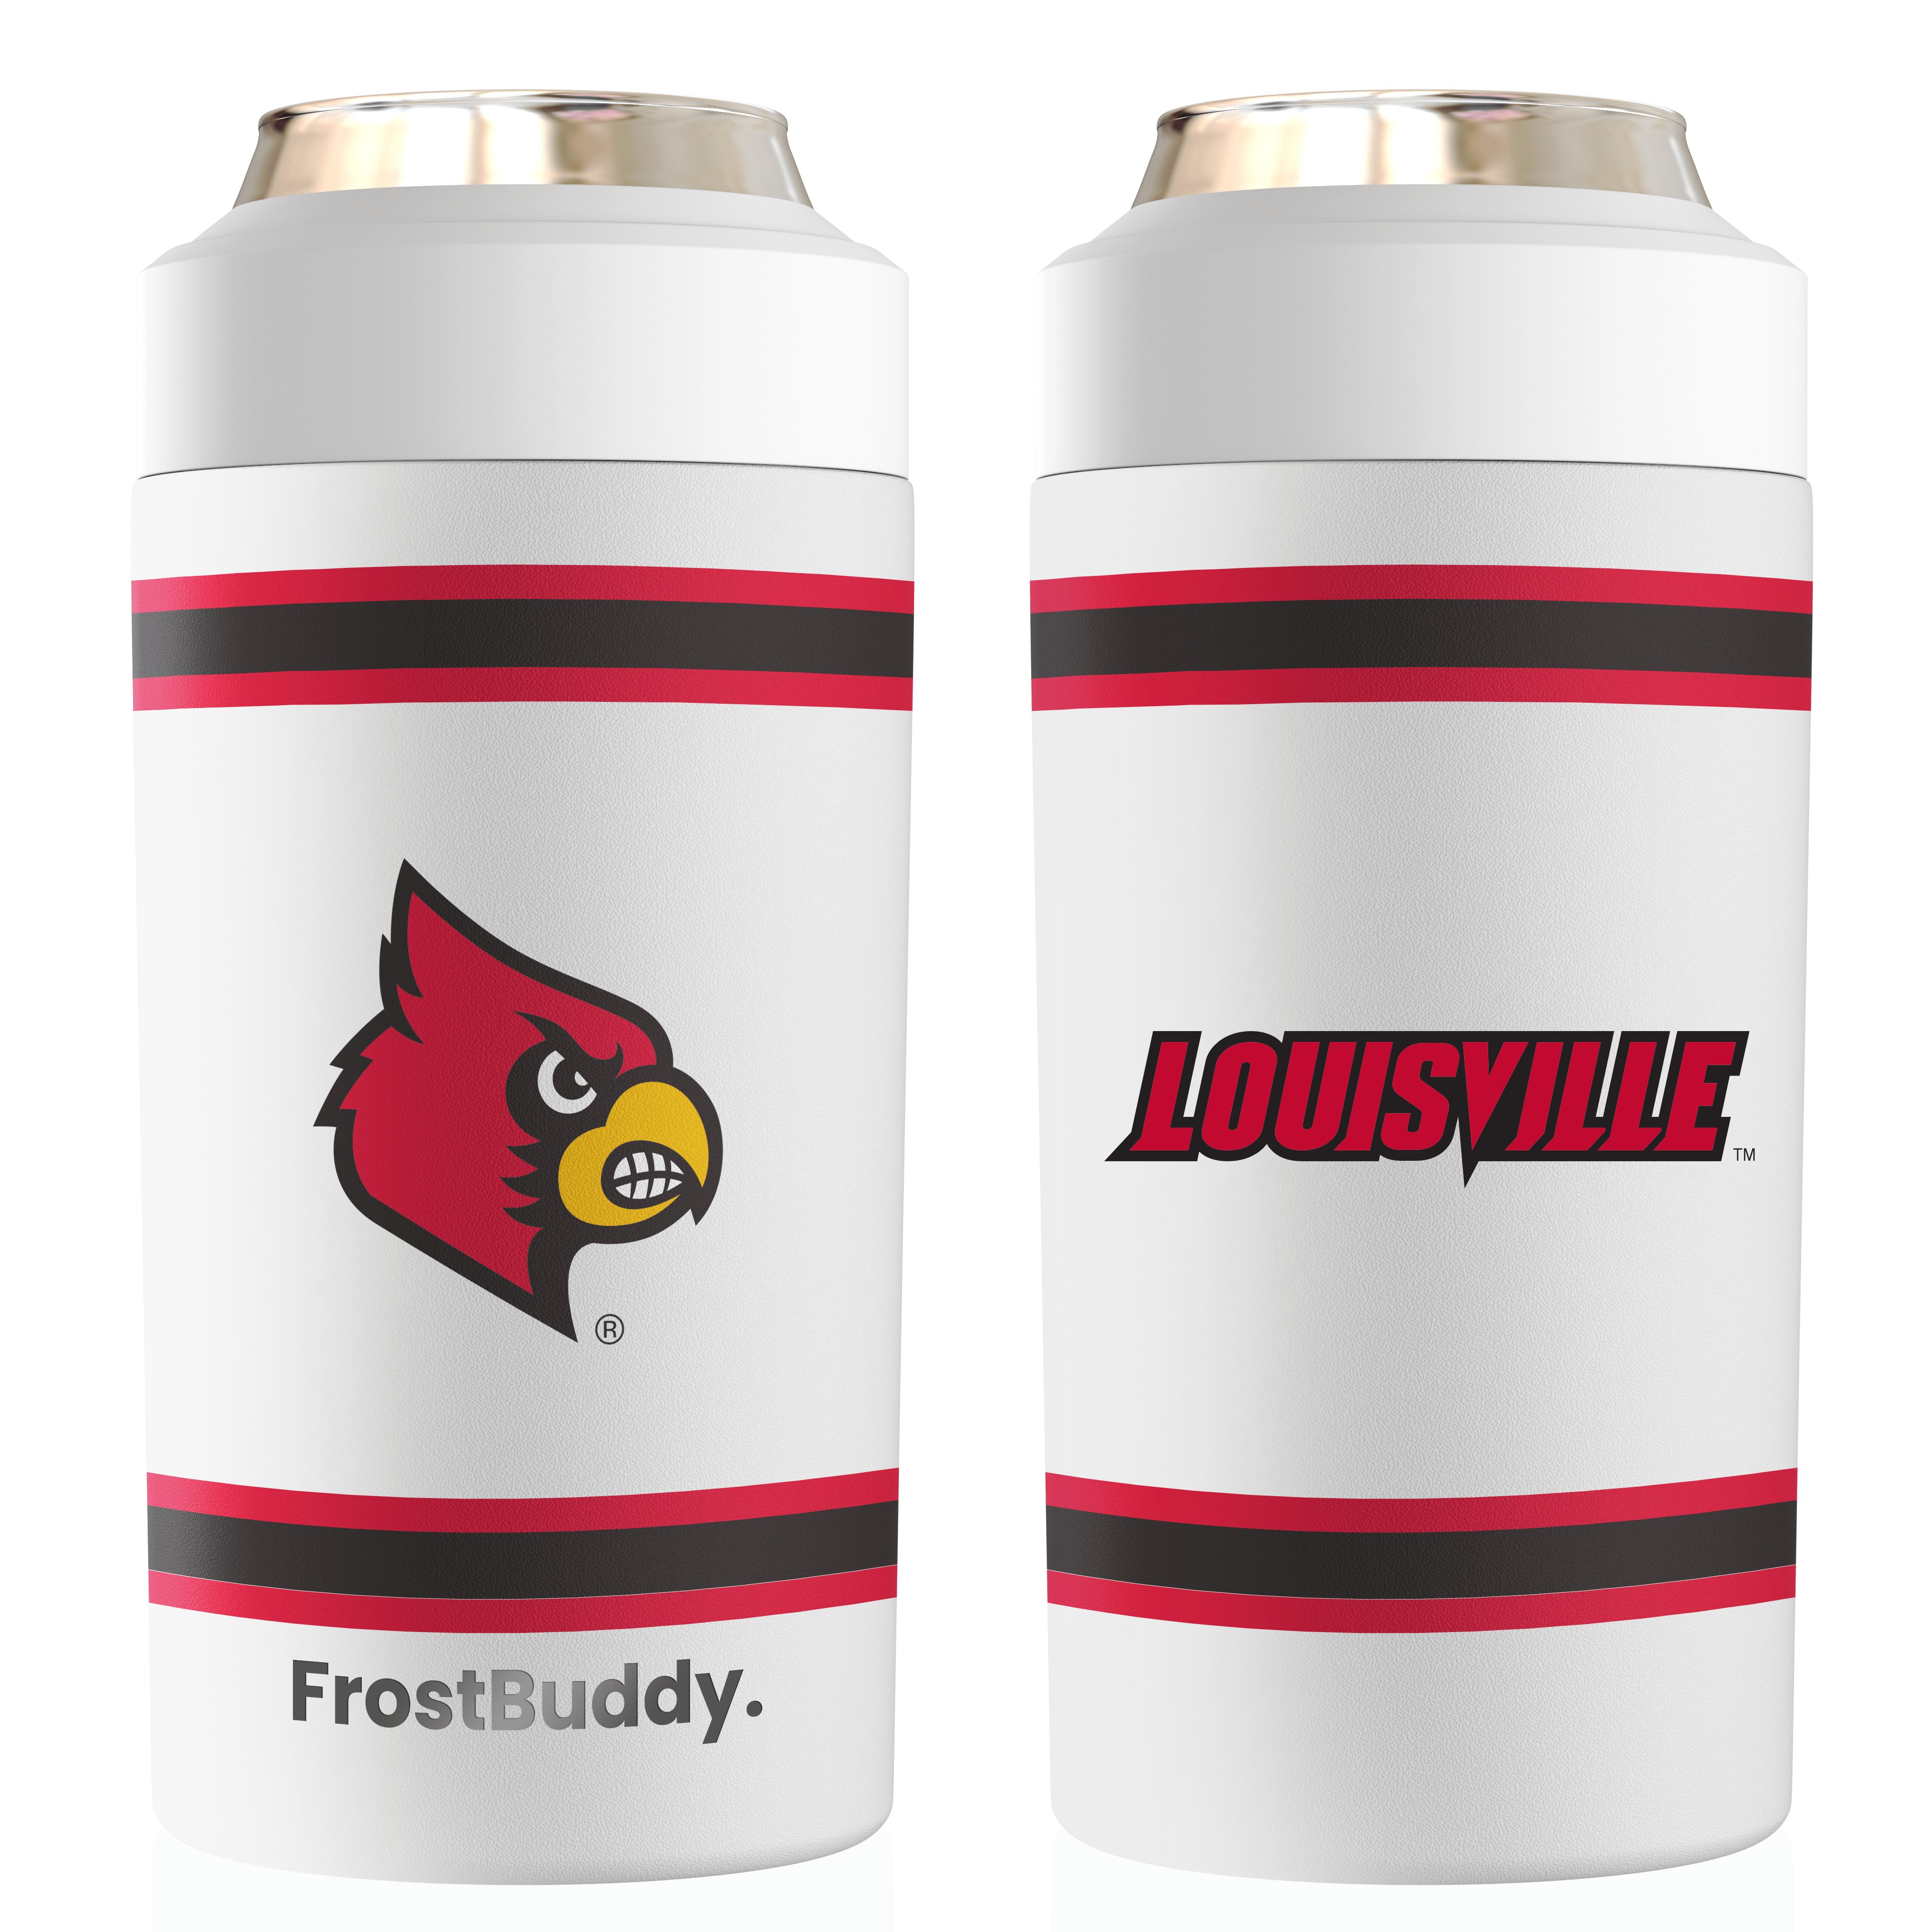 Universal Buddy | University of Louisville - Holds 12oz Cans, Slim Cans, Bottles, 16oz Cans & Bottles - Keep Your Drink Cold for 12+ Hours | Frost